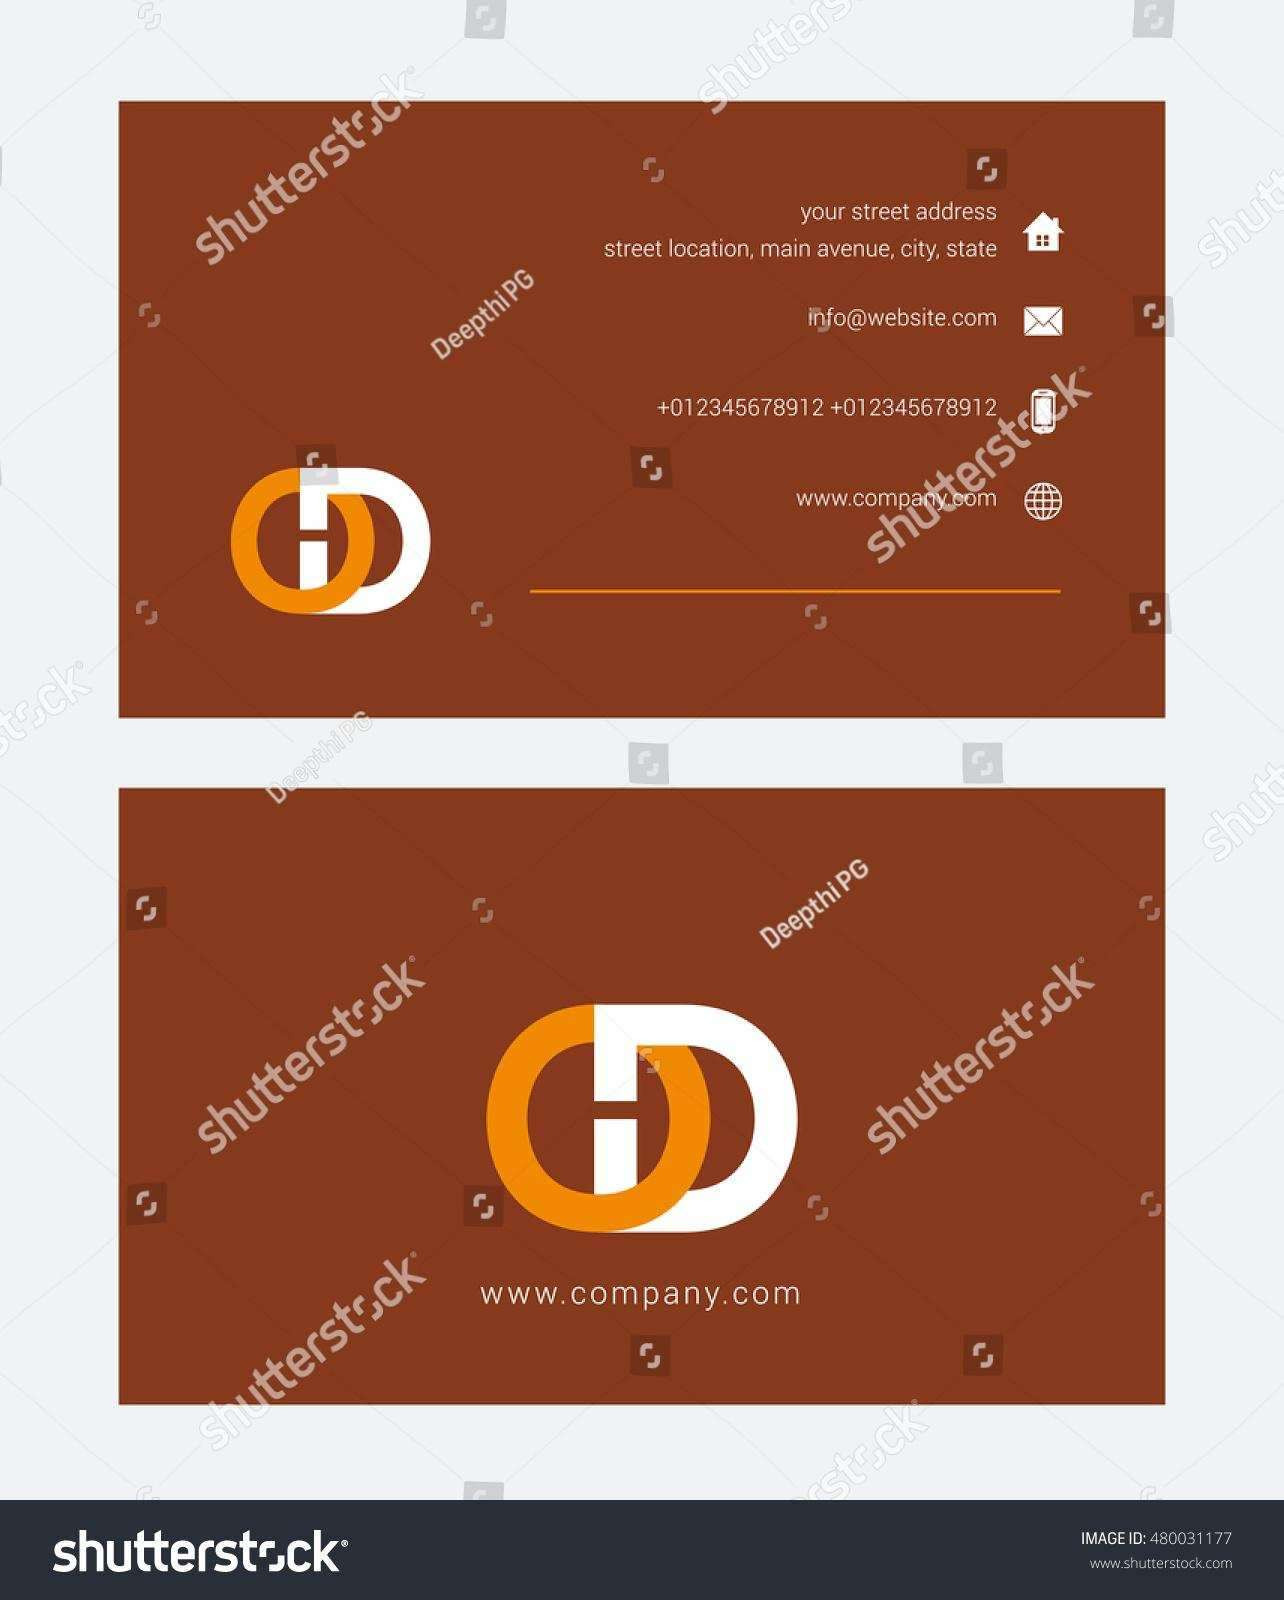 Business Card Powerpoint Templates Free Caquetapositivo Of Template Of Business Card